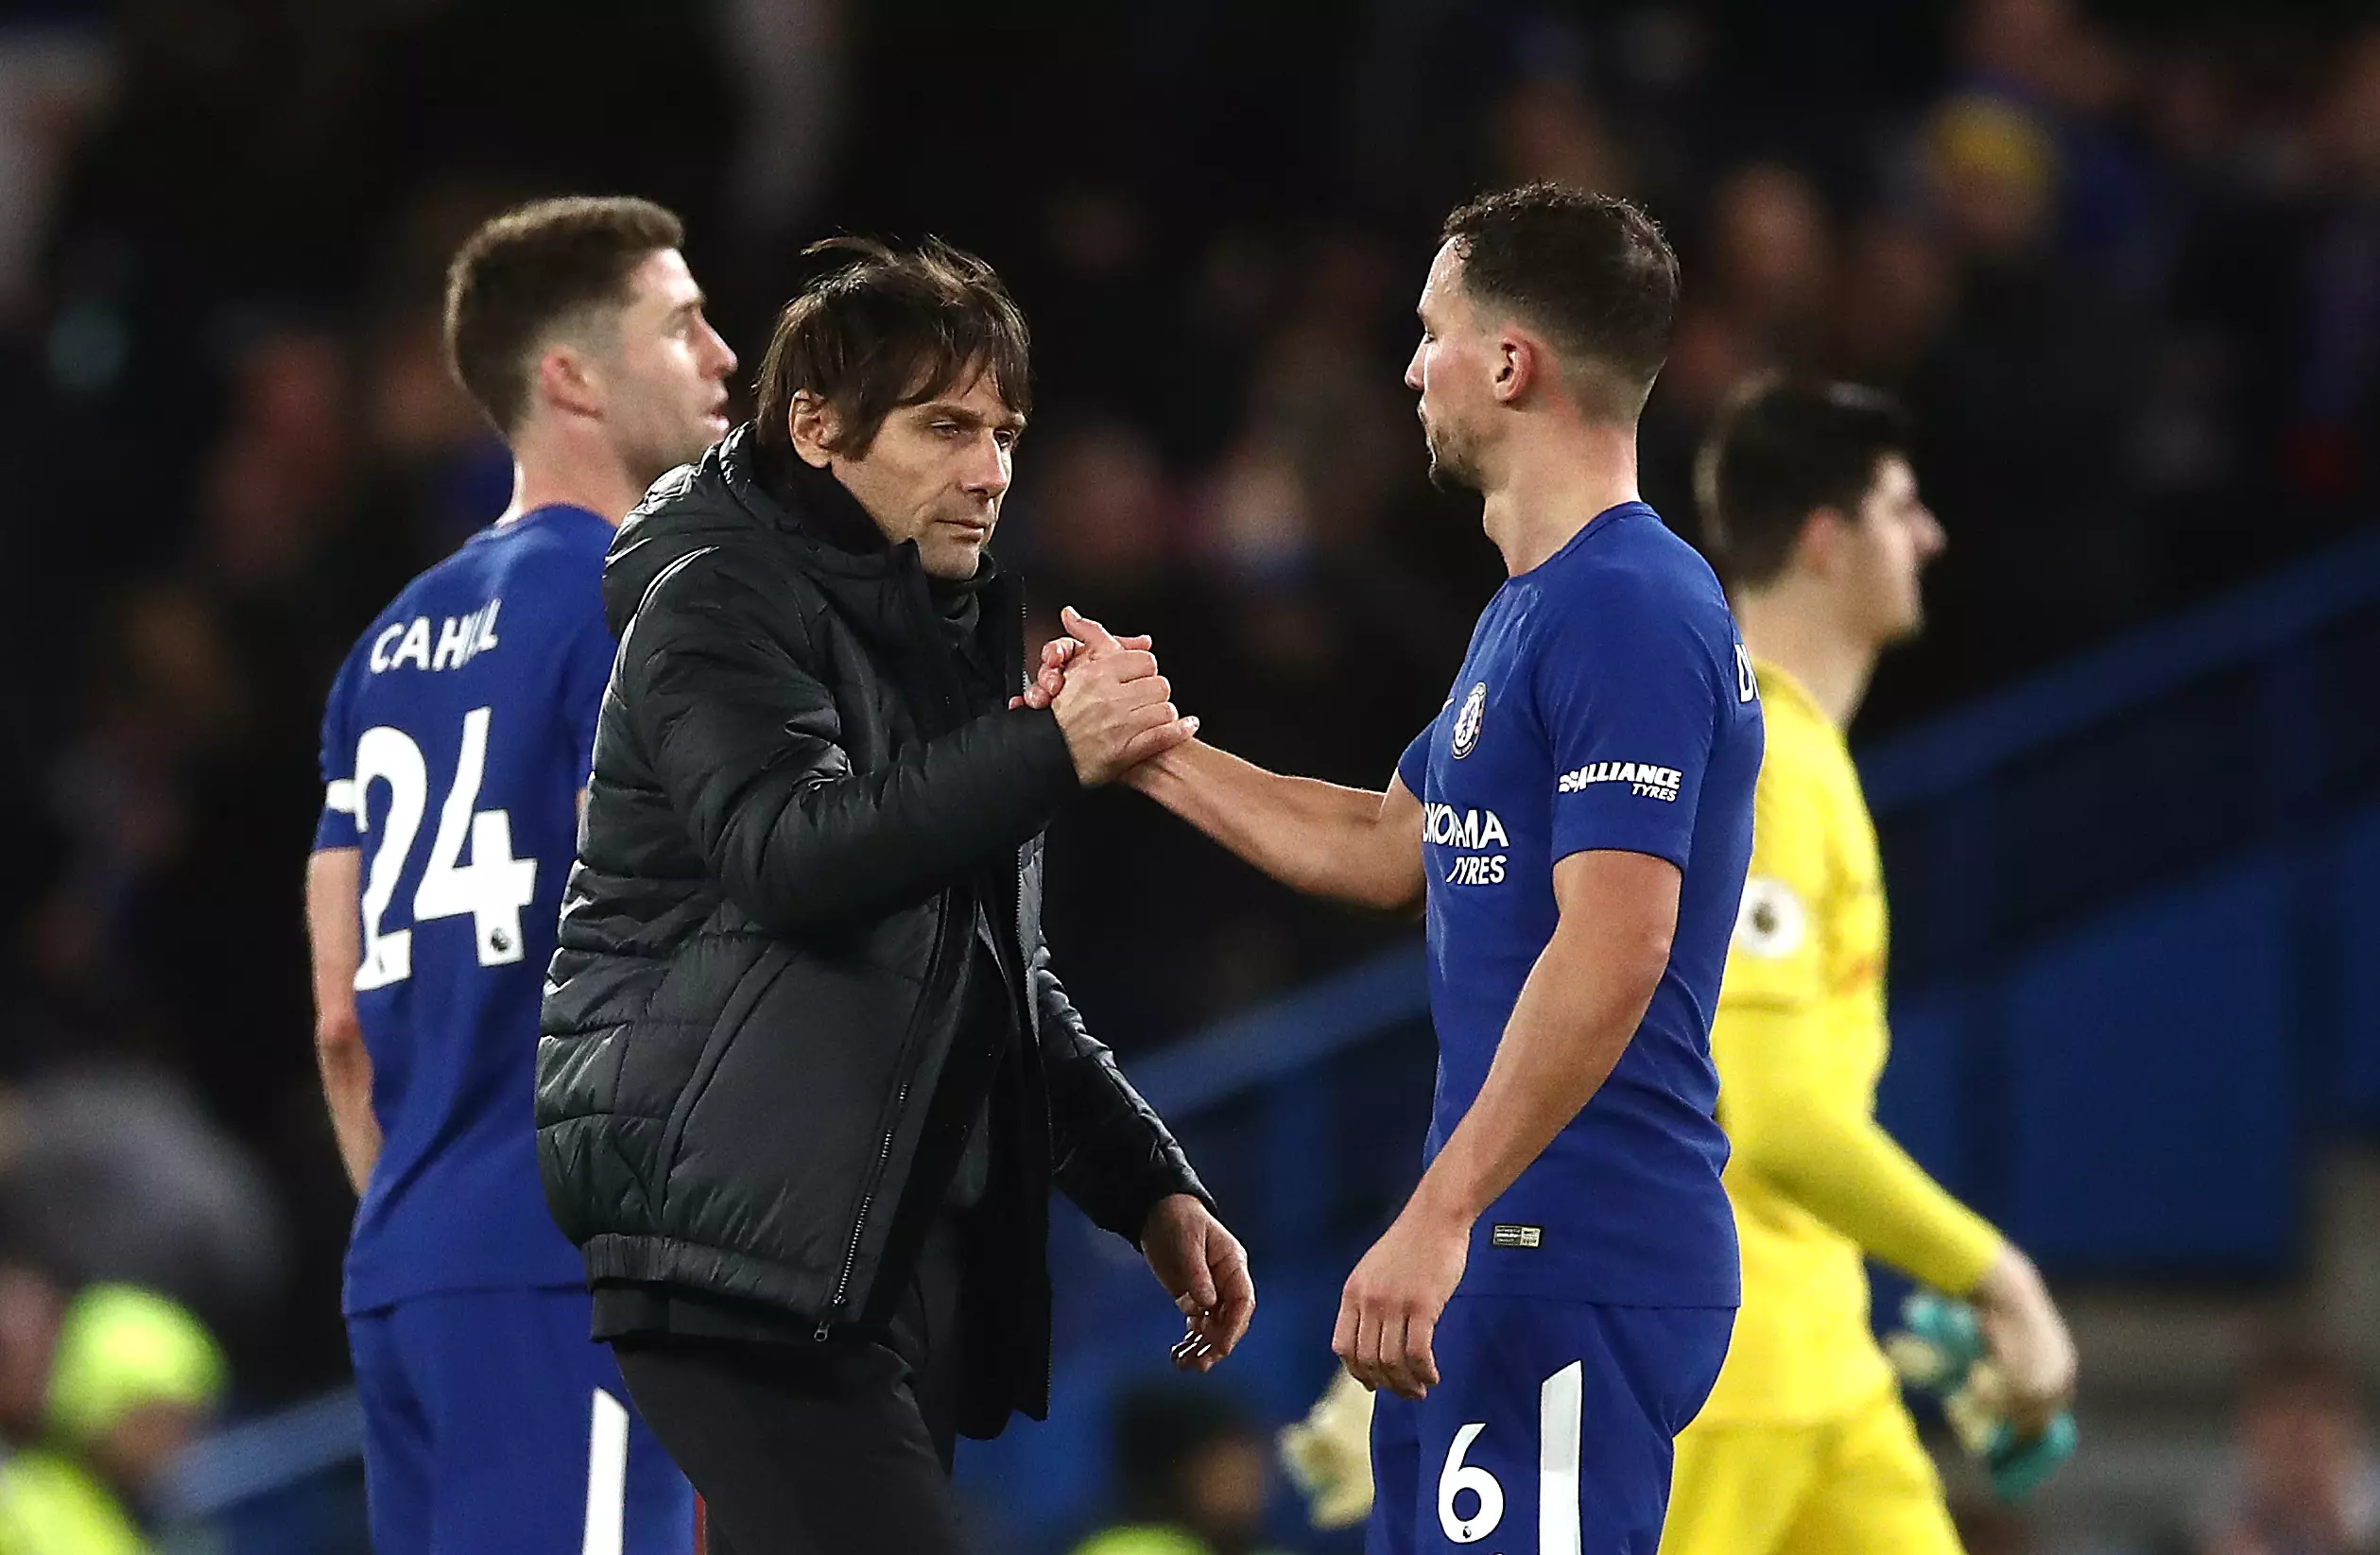 Conte embraces with Drinkwater. Image: PA